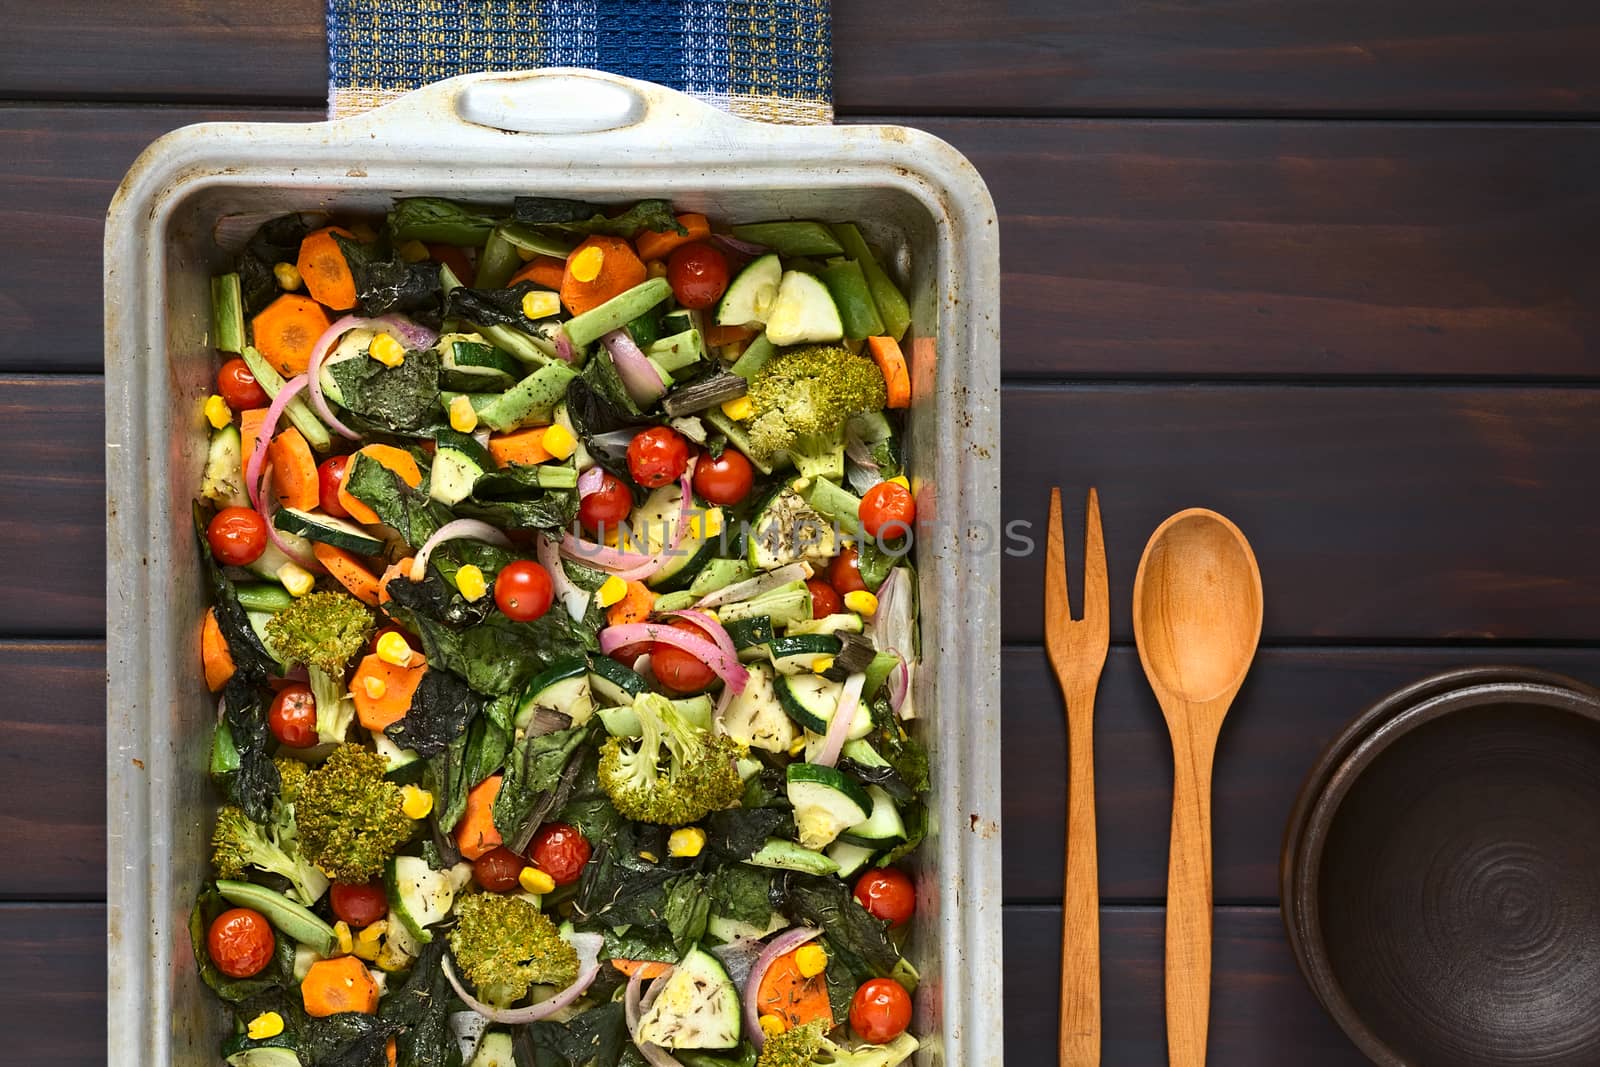 Overhead shot of baked vegetables (zucchini, onion, cherry tomato, broccoli, carrot, sweet corn, green bean, chard) seasoned with thyme in baking dish, photographed on dark wood with natural light